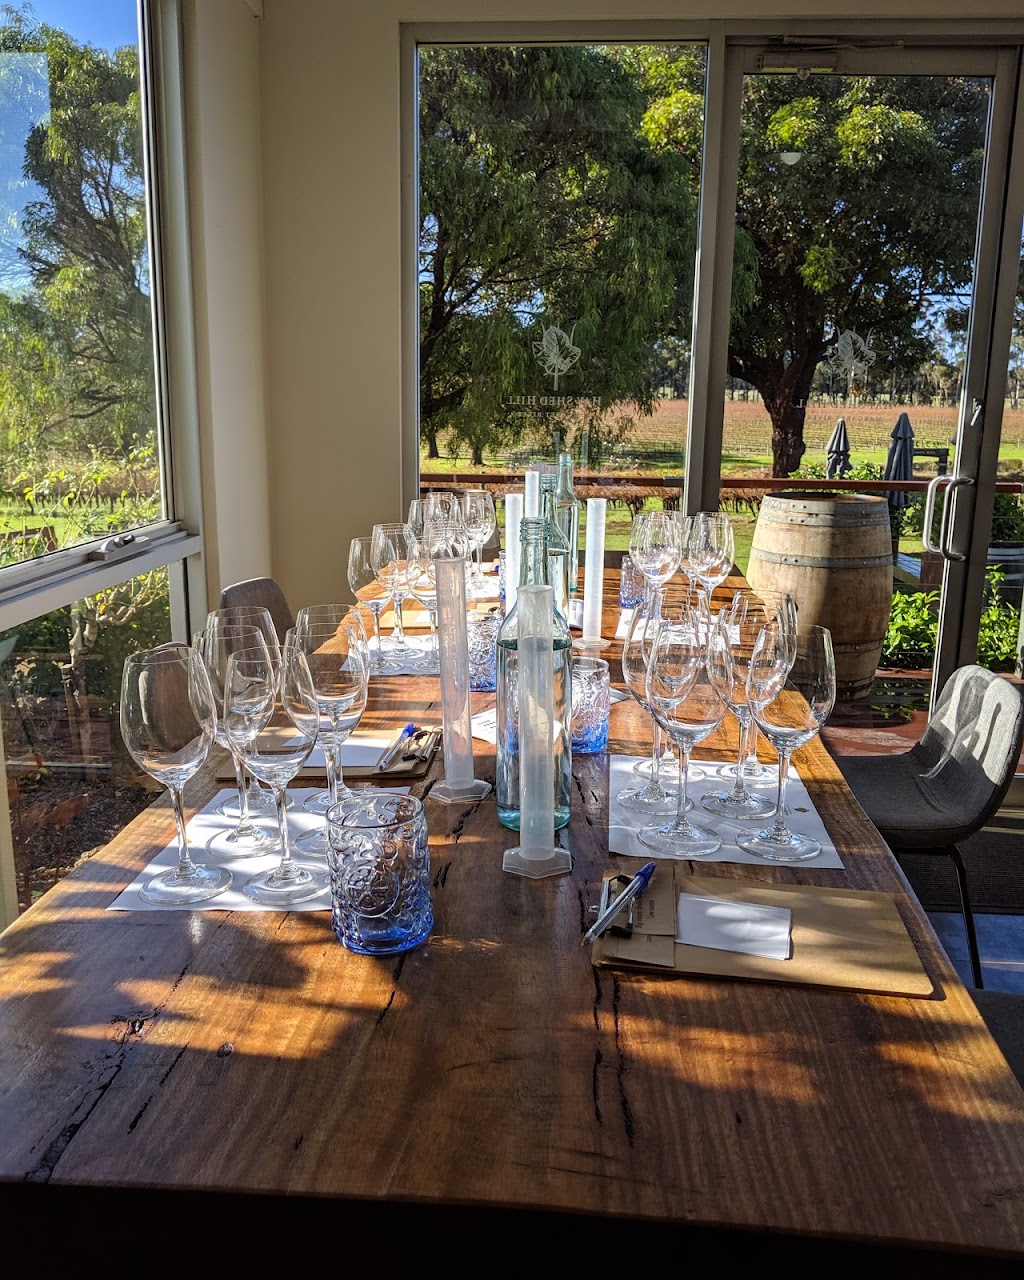 Hay Shed Hill Wines | 511 Harmans Mill Rd, Wilyabrup WA 6280, Australia | Phone: (08) 9755 6046